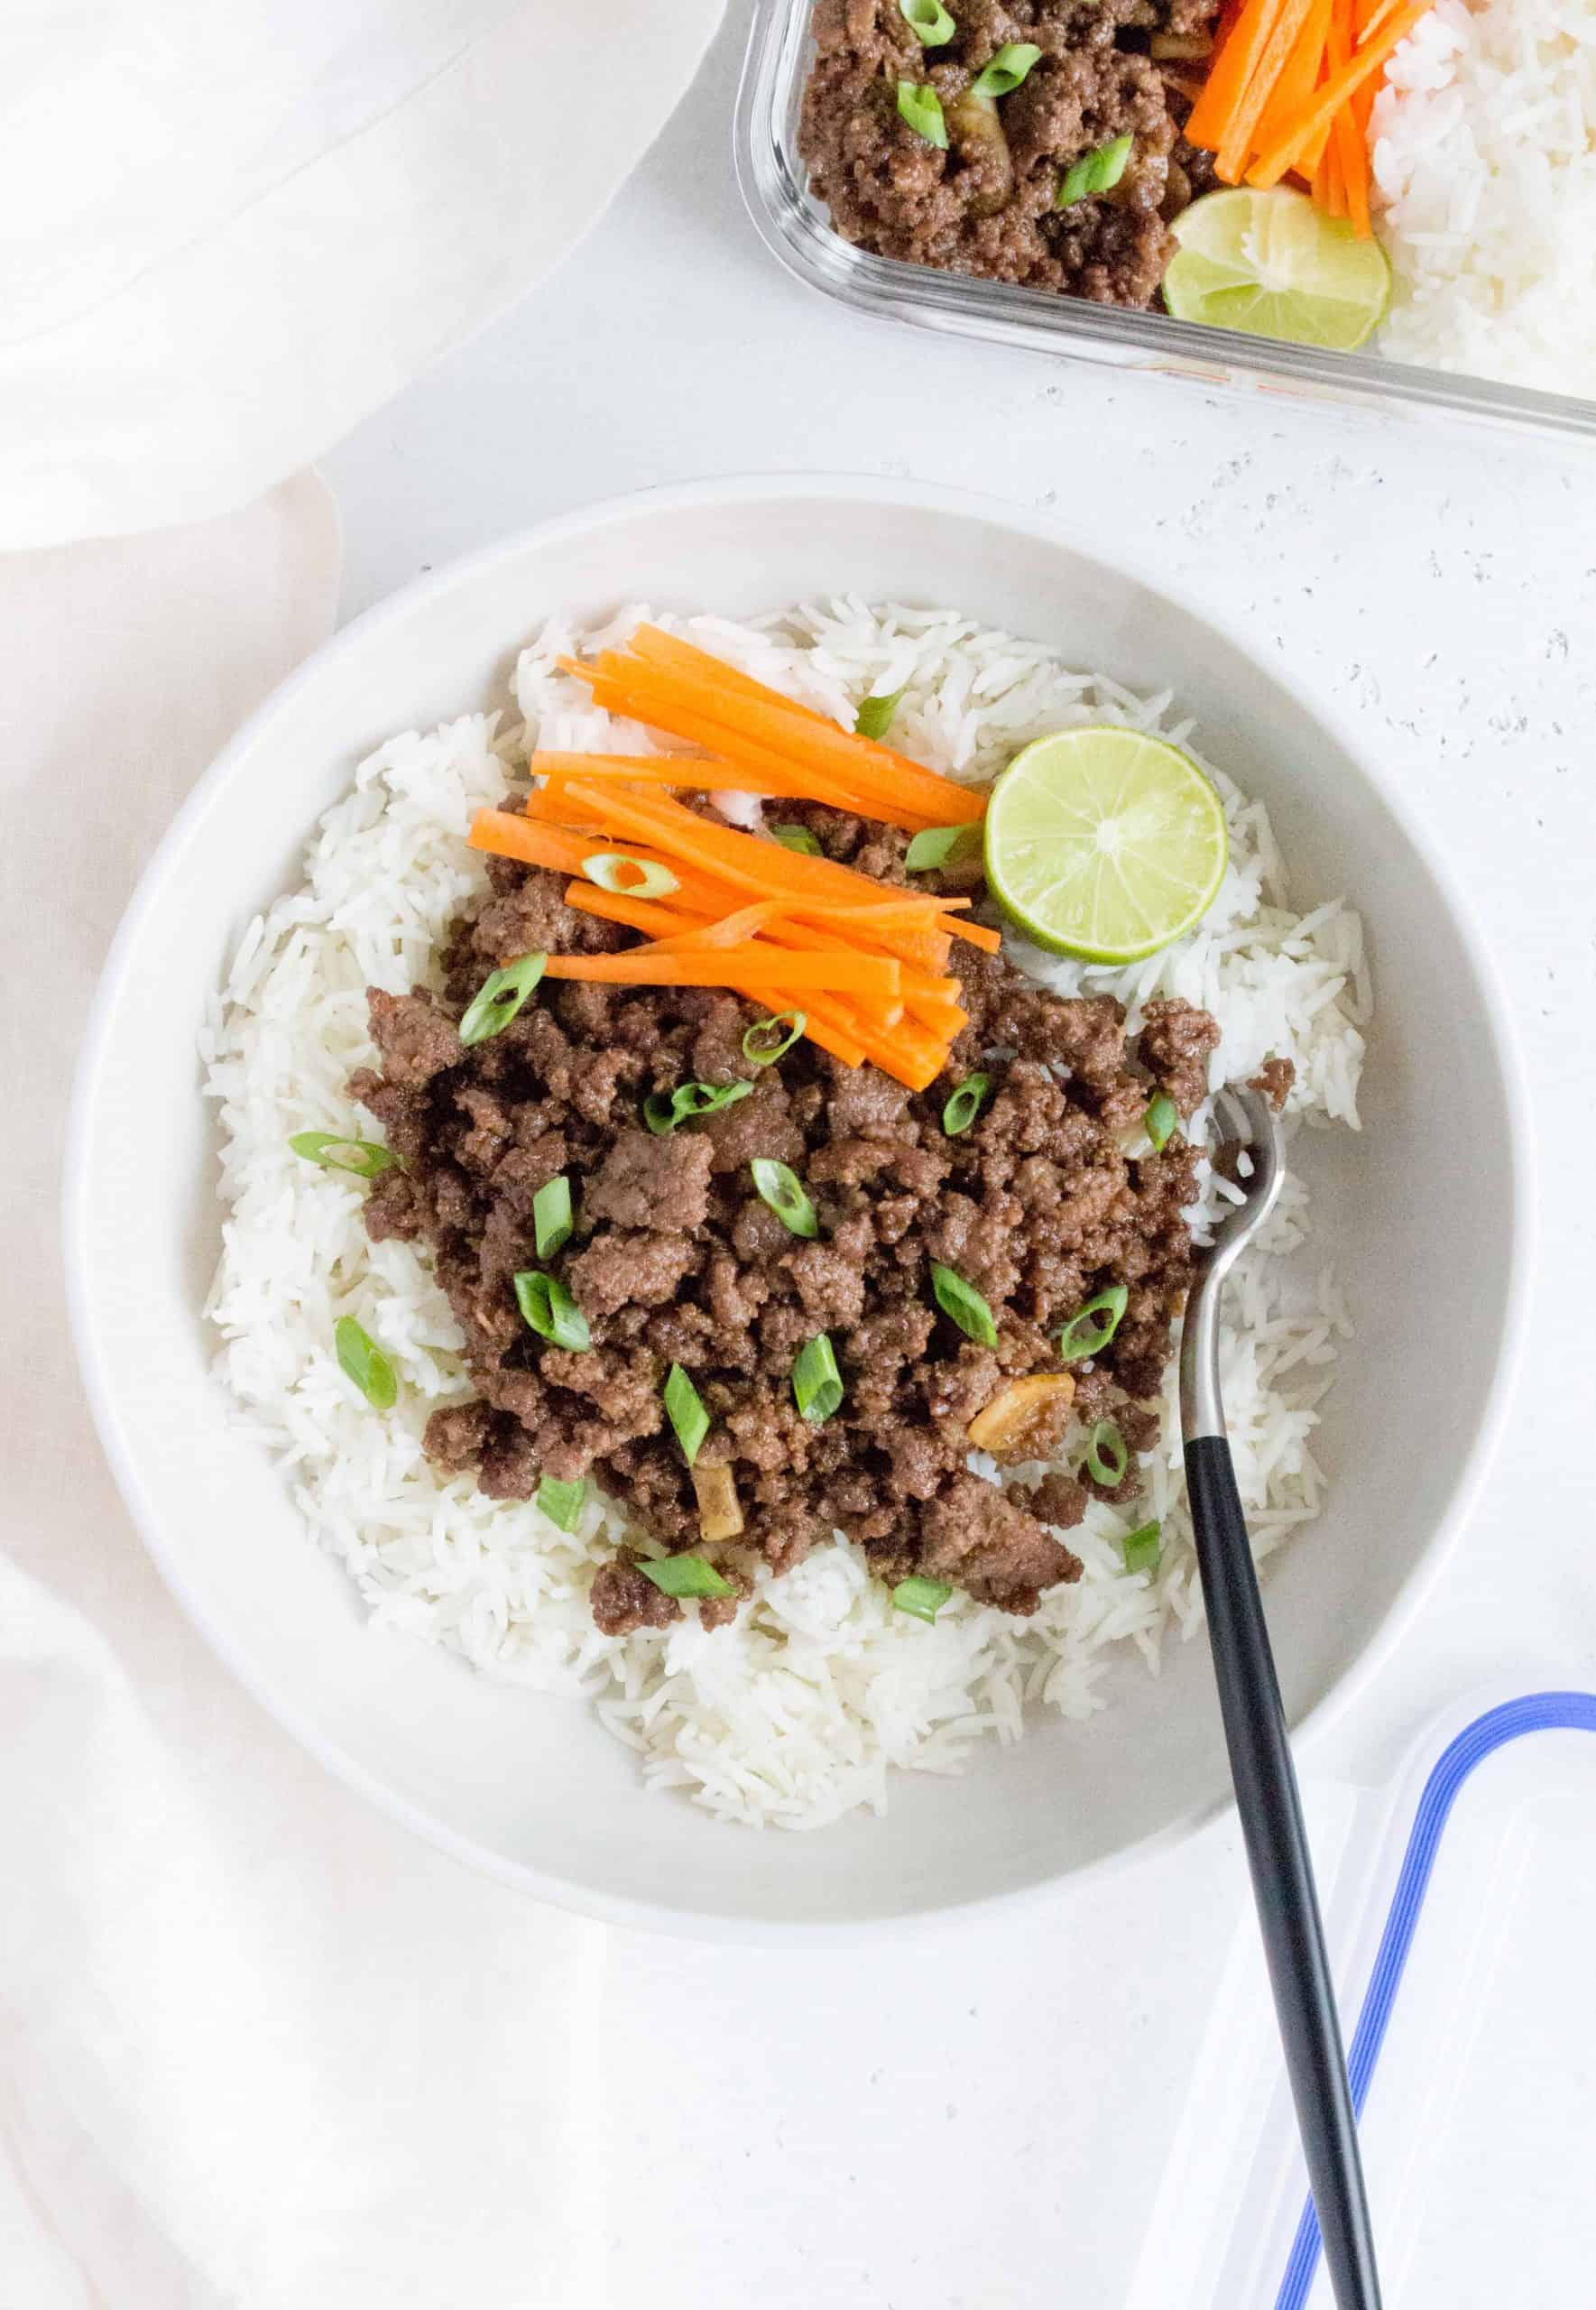 Made in under 30 minutes, this Honey Hoisin Beef Bowls is the perfect mix of sweet and savoury! This quick recipe makes for a delicious meal prep or as a last minute meal.